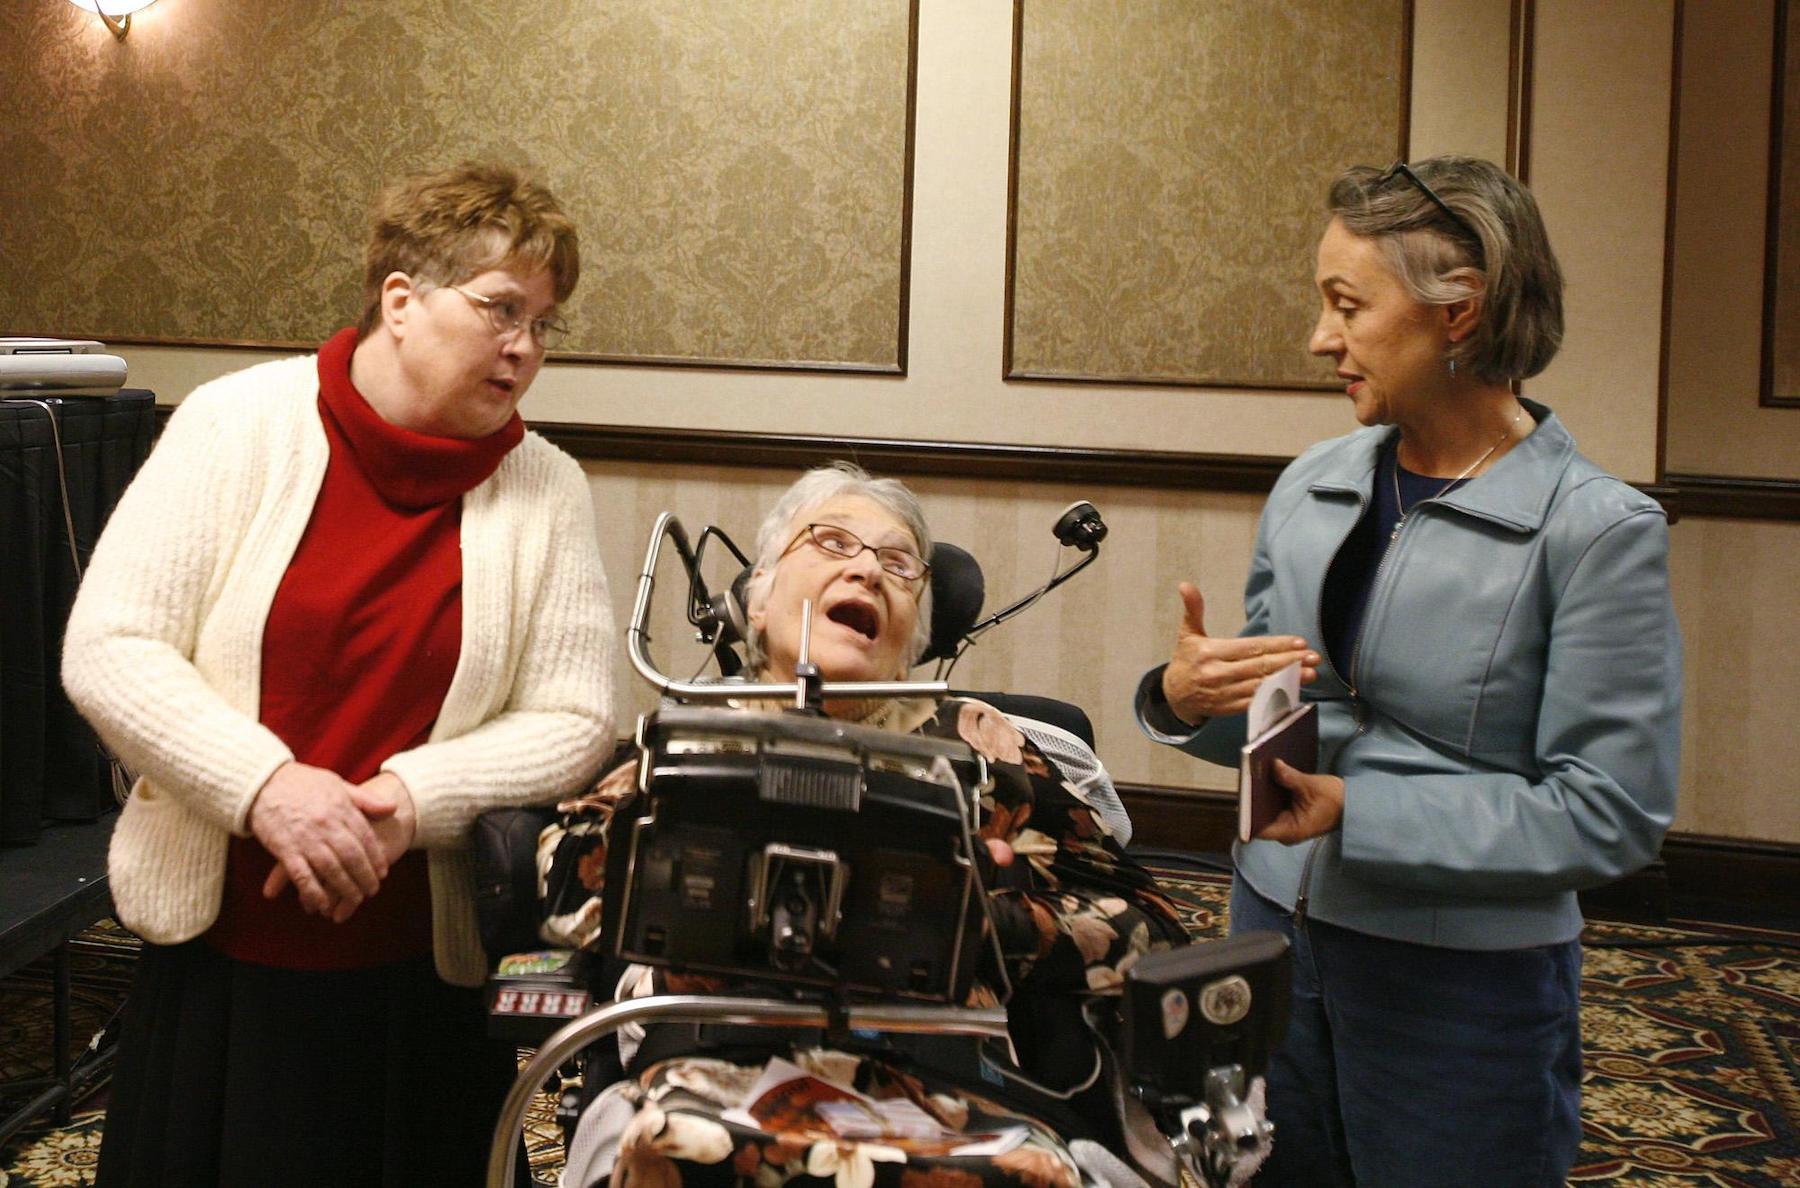 Three woman, one of whom is in a wheelchair, talk amongst themselves.